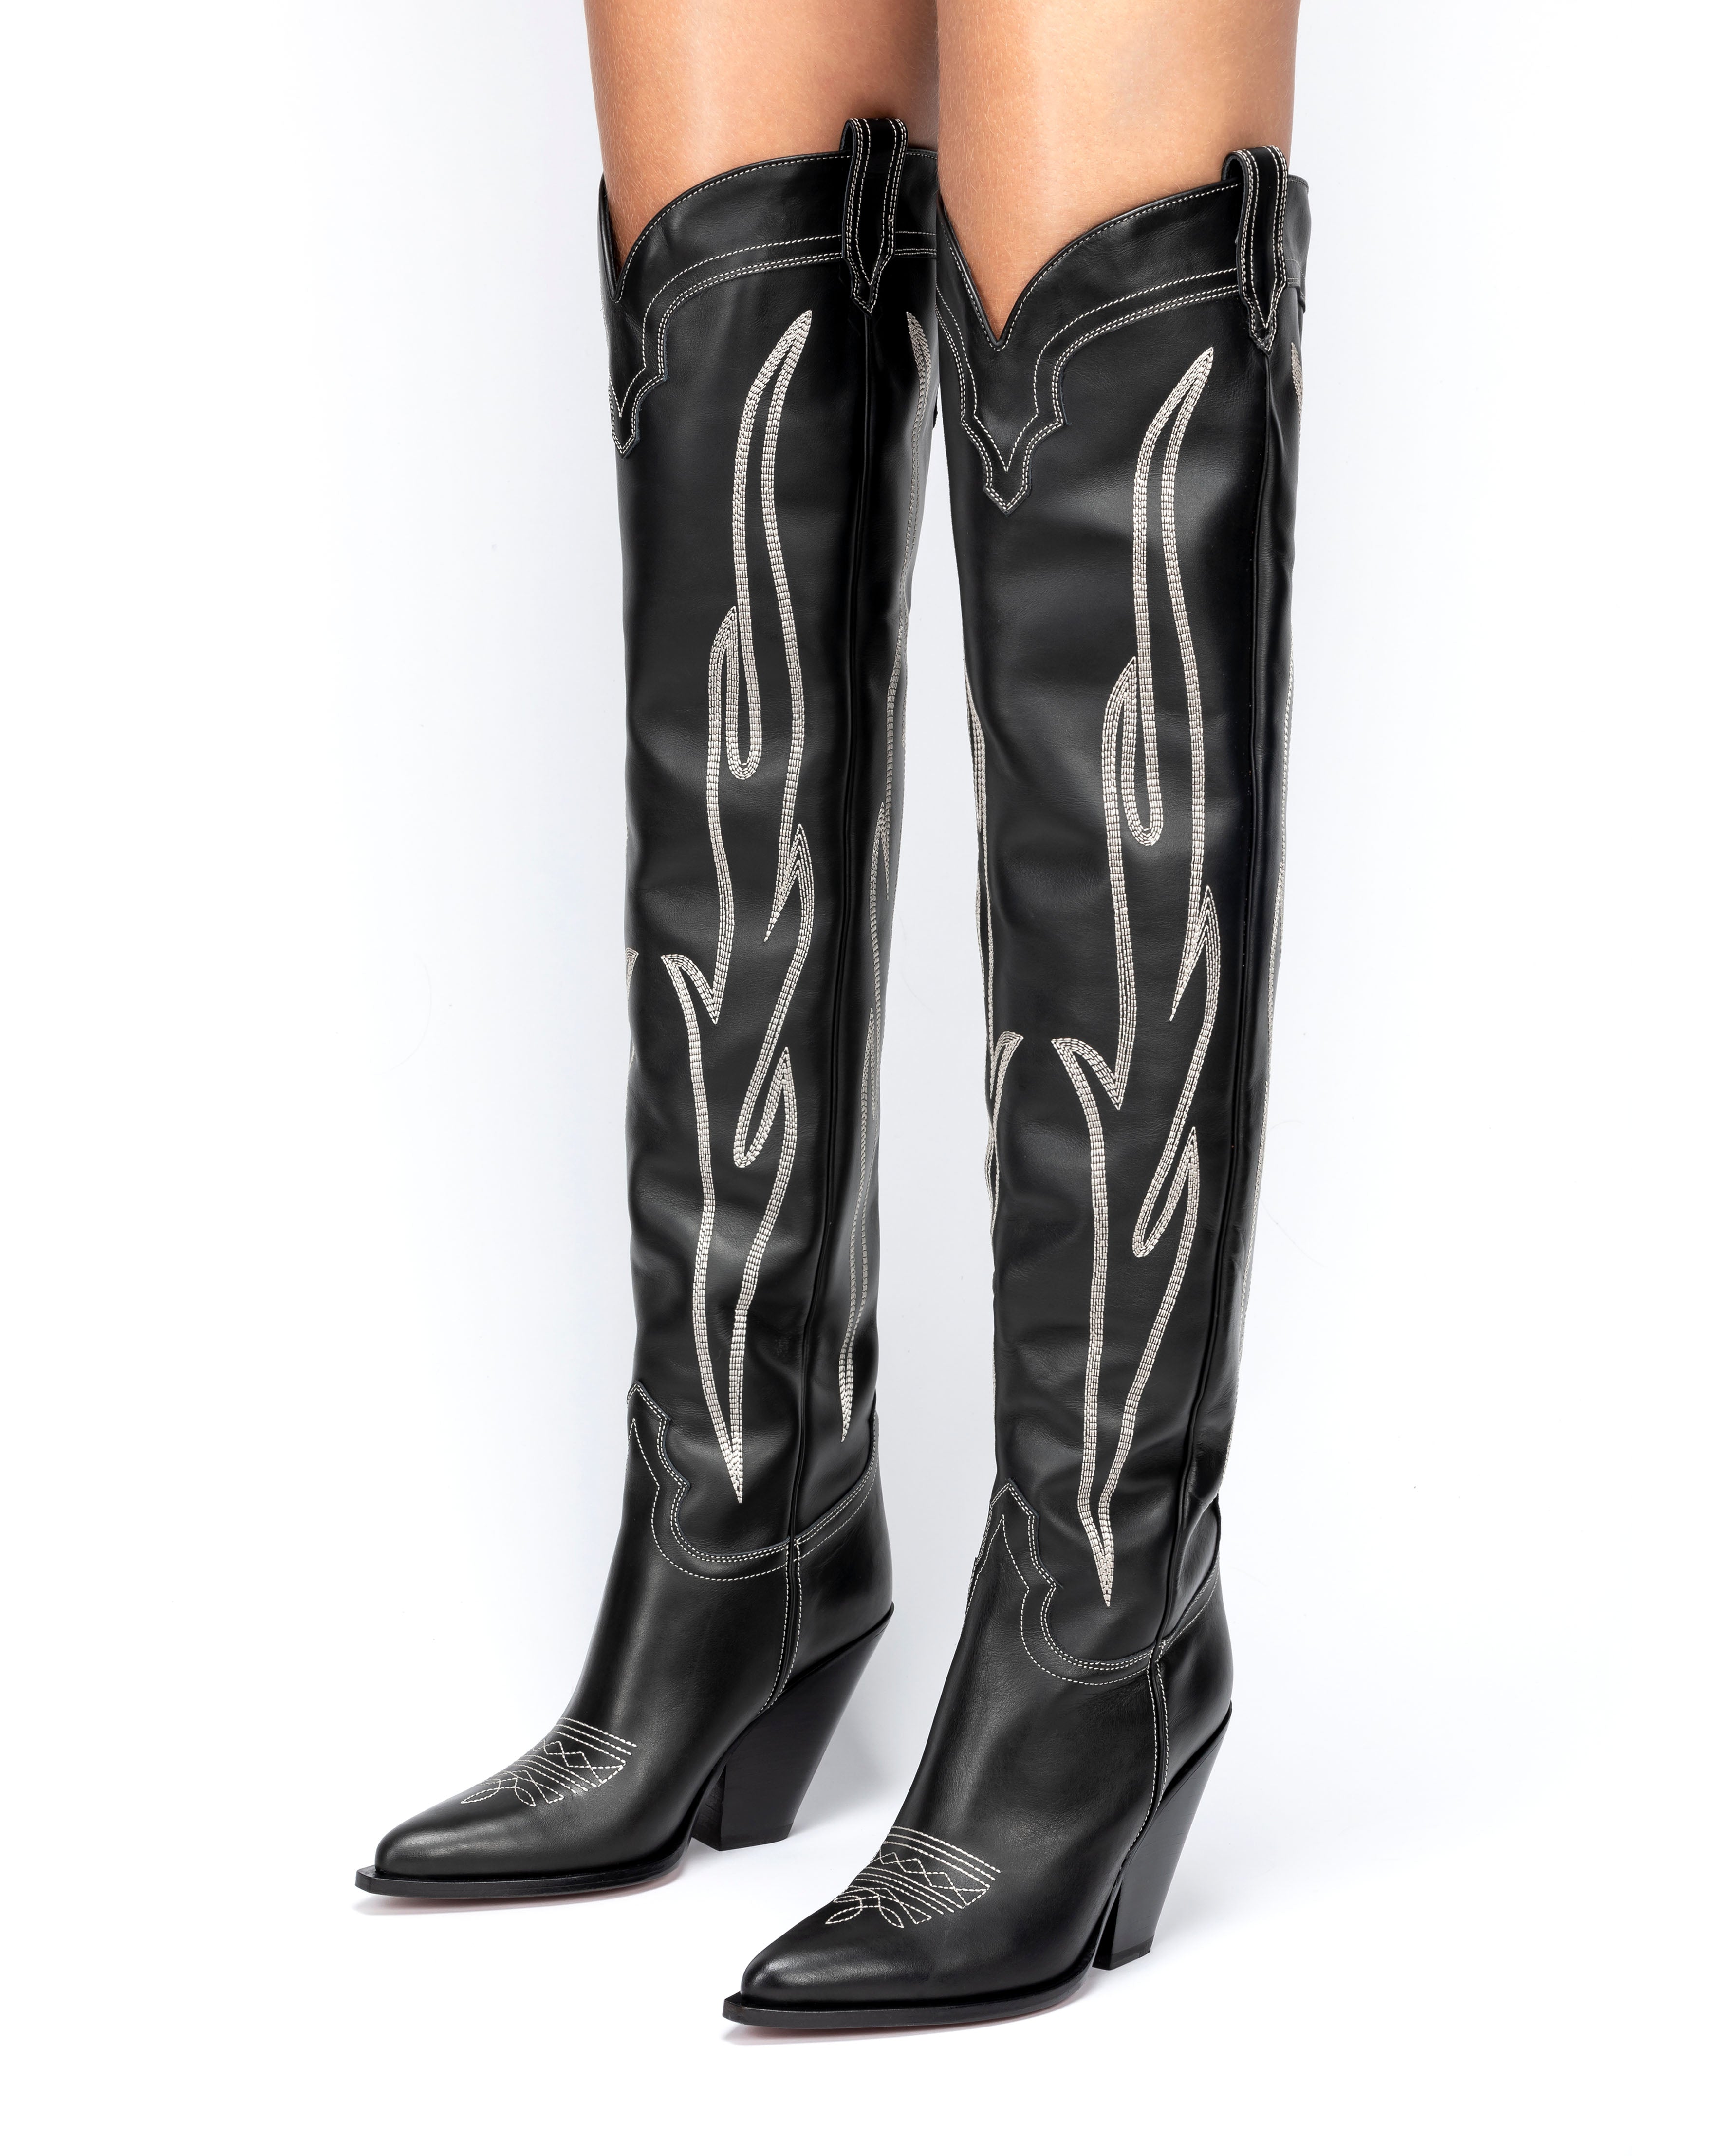 HERMOSA-90-Women_s-Over-The-Knee-Boots-in-Black-Calfskin-Off-White-Embroidery_04